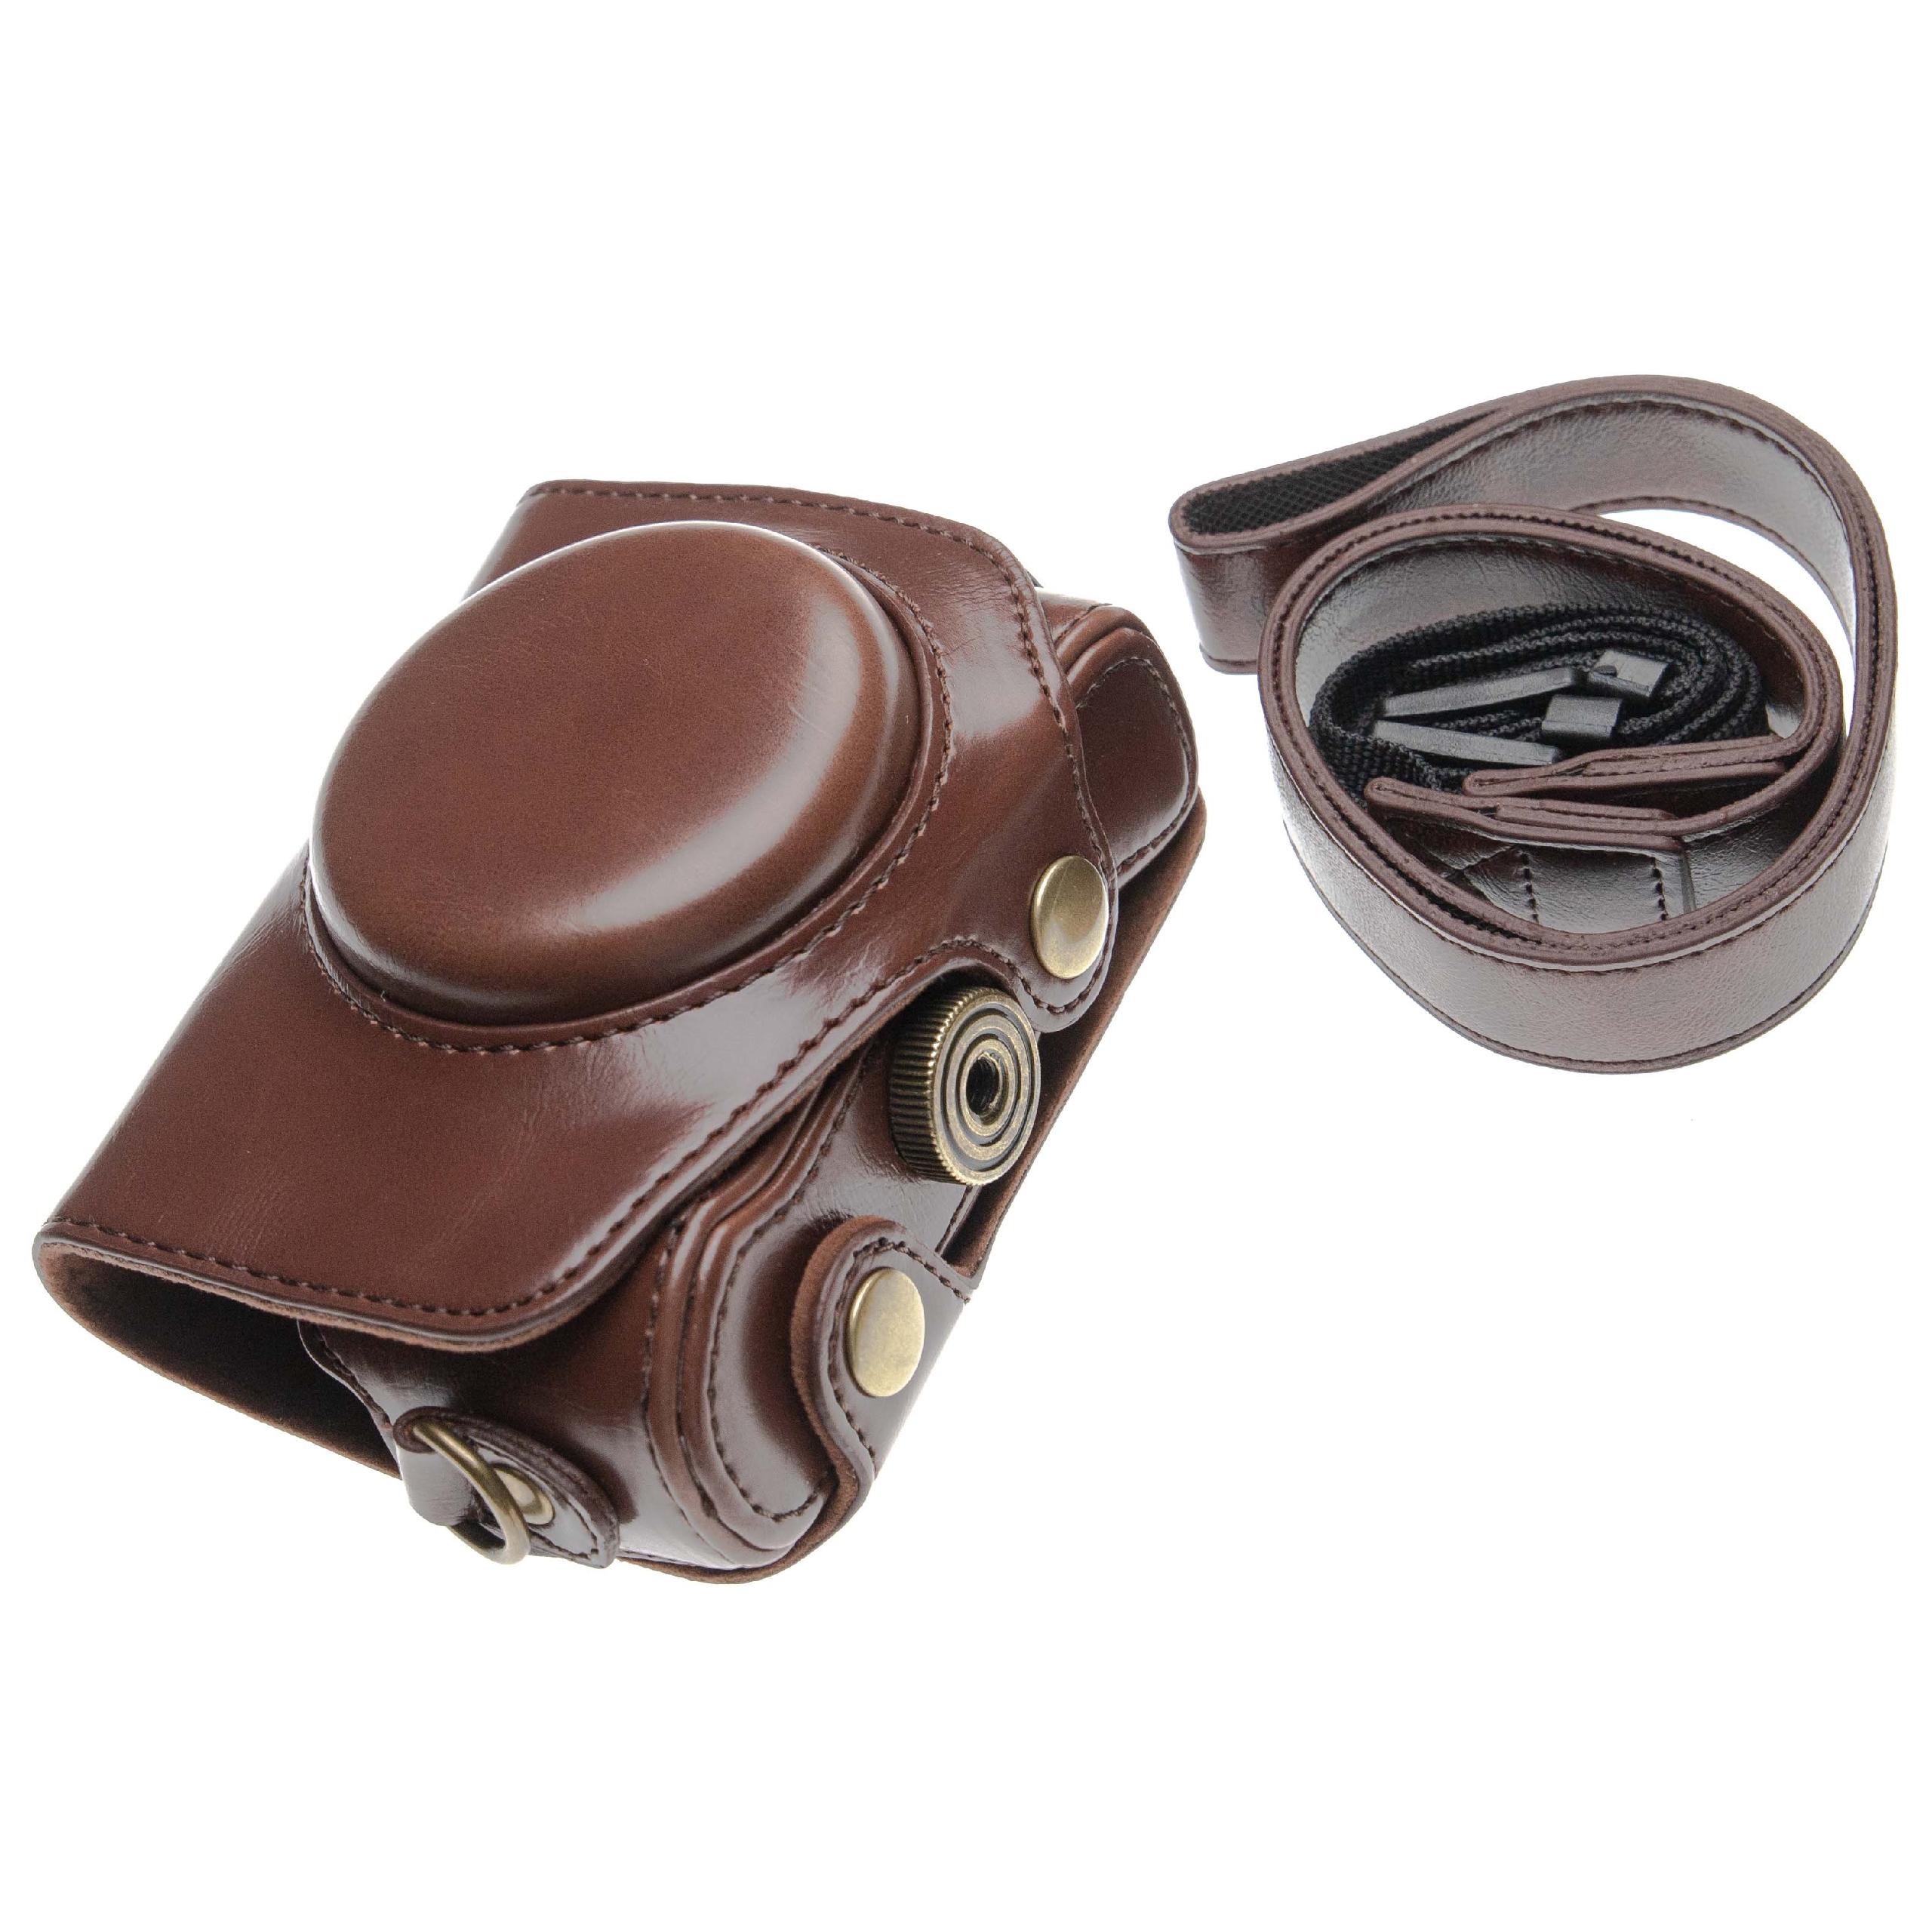 Camera Case suitable for Canon PowerShot G7XII, G7x Mark II Camera - brown + 1/4" Tripod Screw + Shoulder Stra